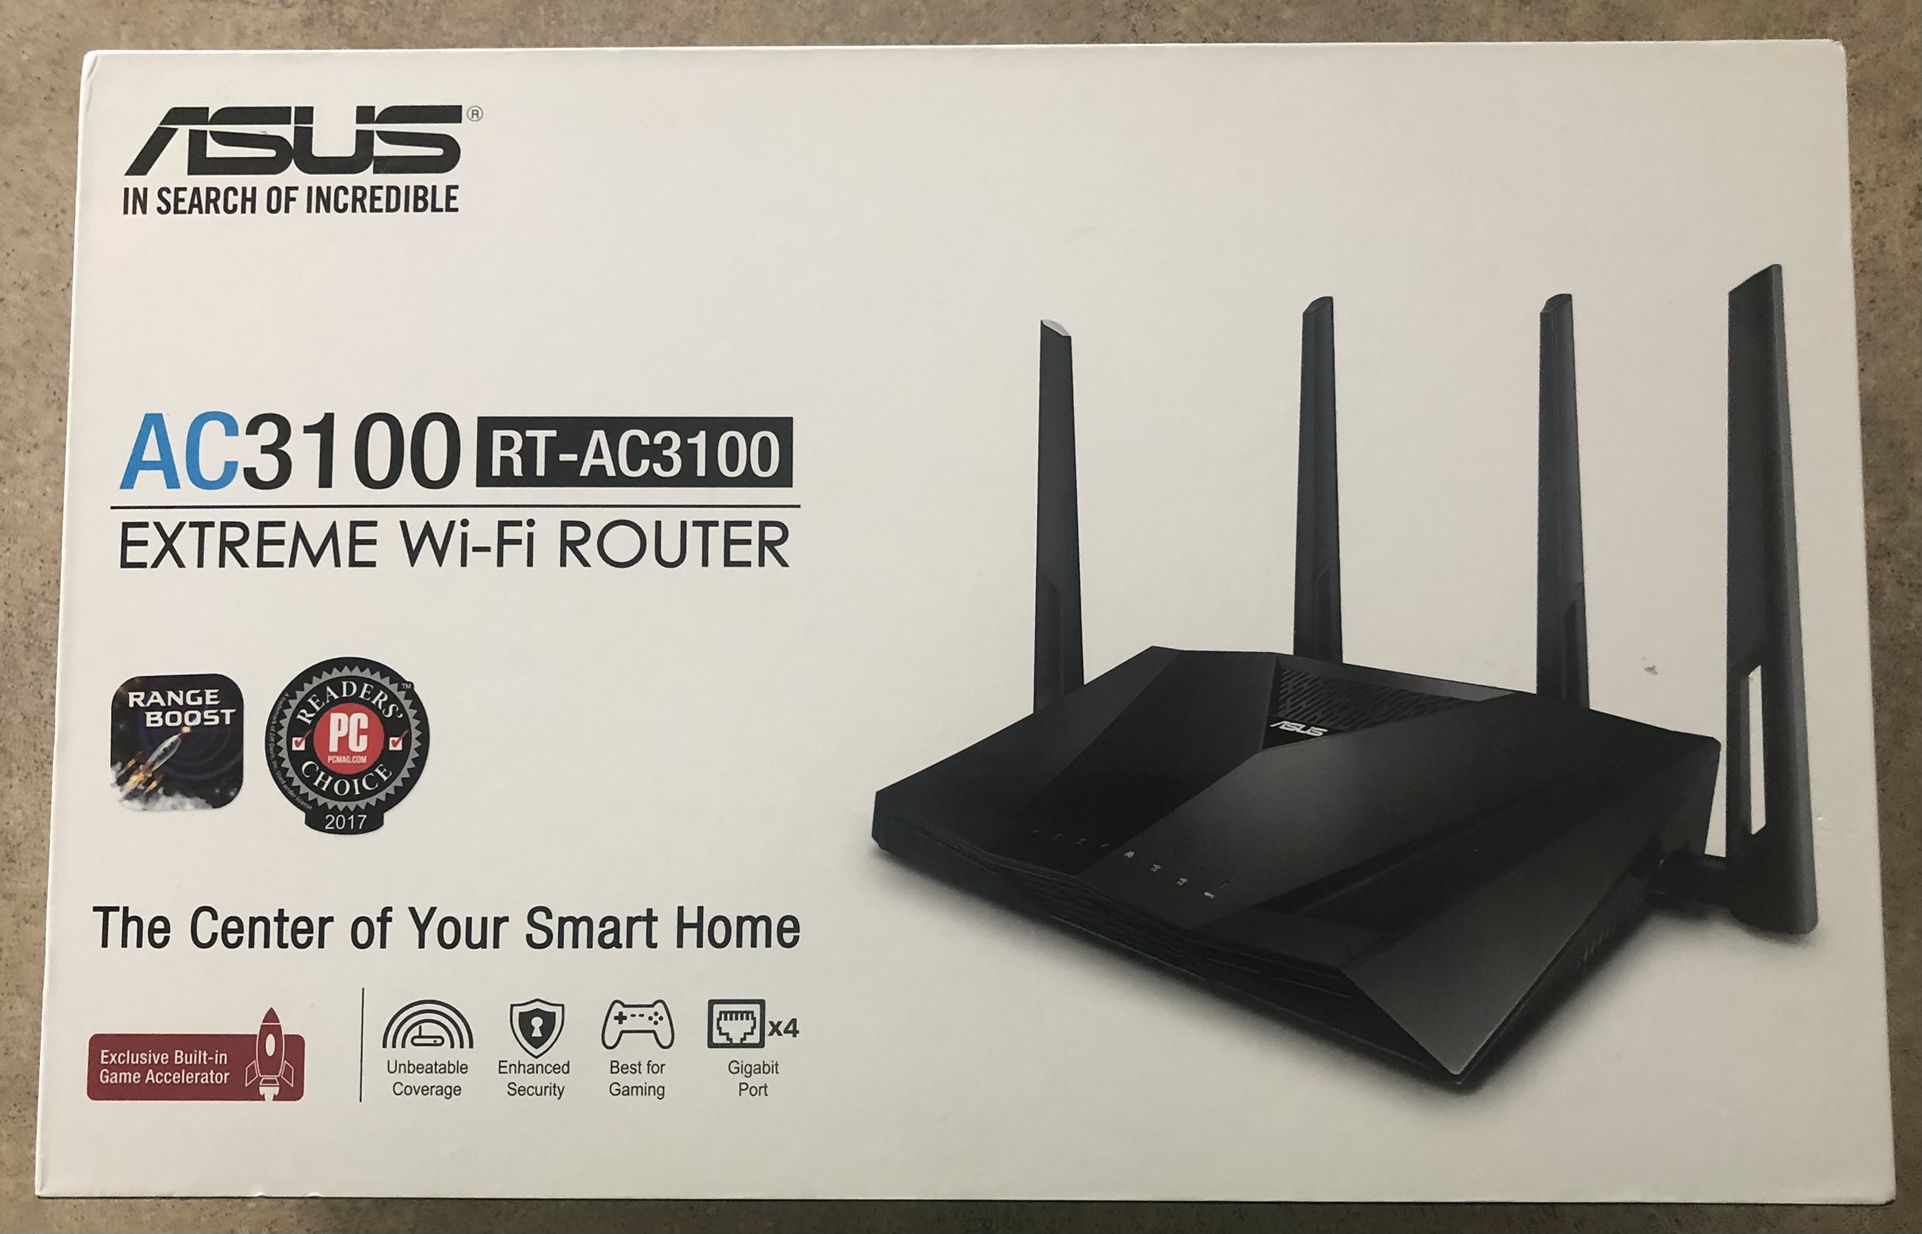 ASUS AC3100 RT-AC3100 WIFI ROUTER